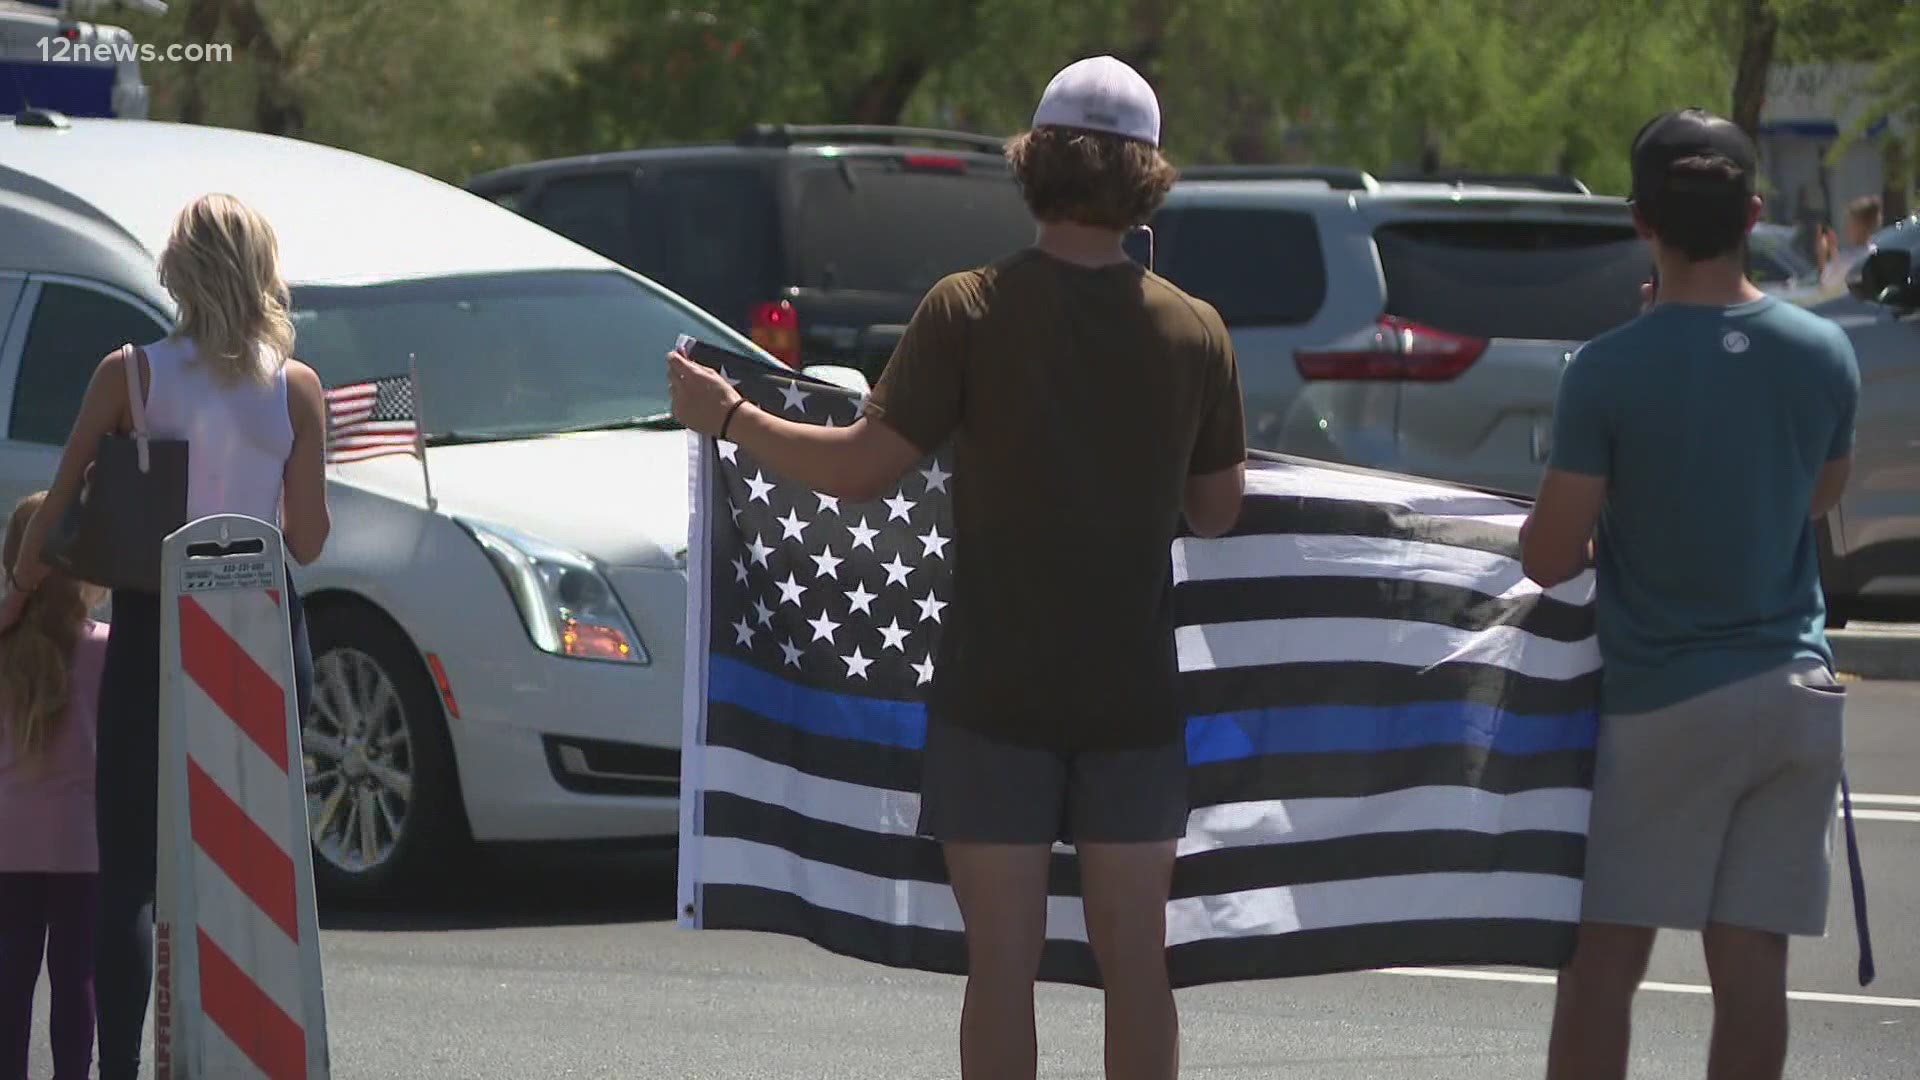 Officer Christopher Farrar was killed last week after a suspect him with a car following a high-speed chase. A procession honoring Farrar was held on Friday.